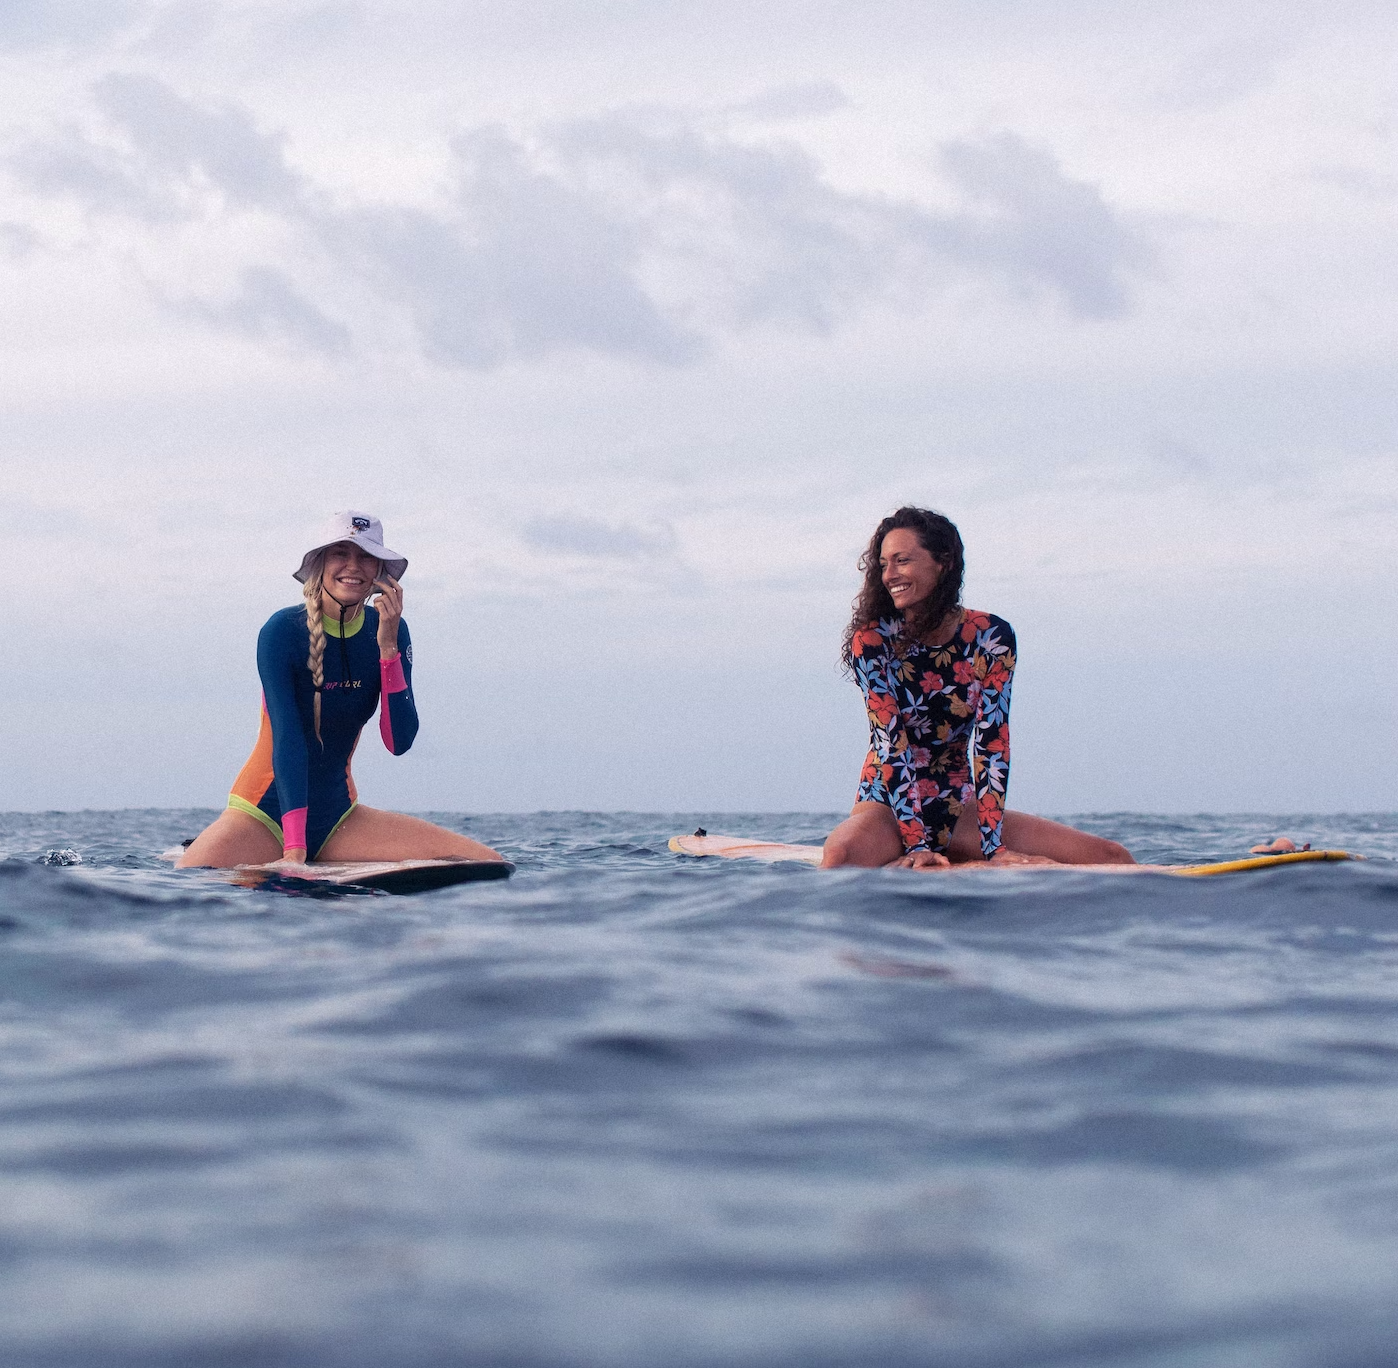 Kunna Haan and Kate surfing in the Maldives with Land of Ride